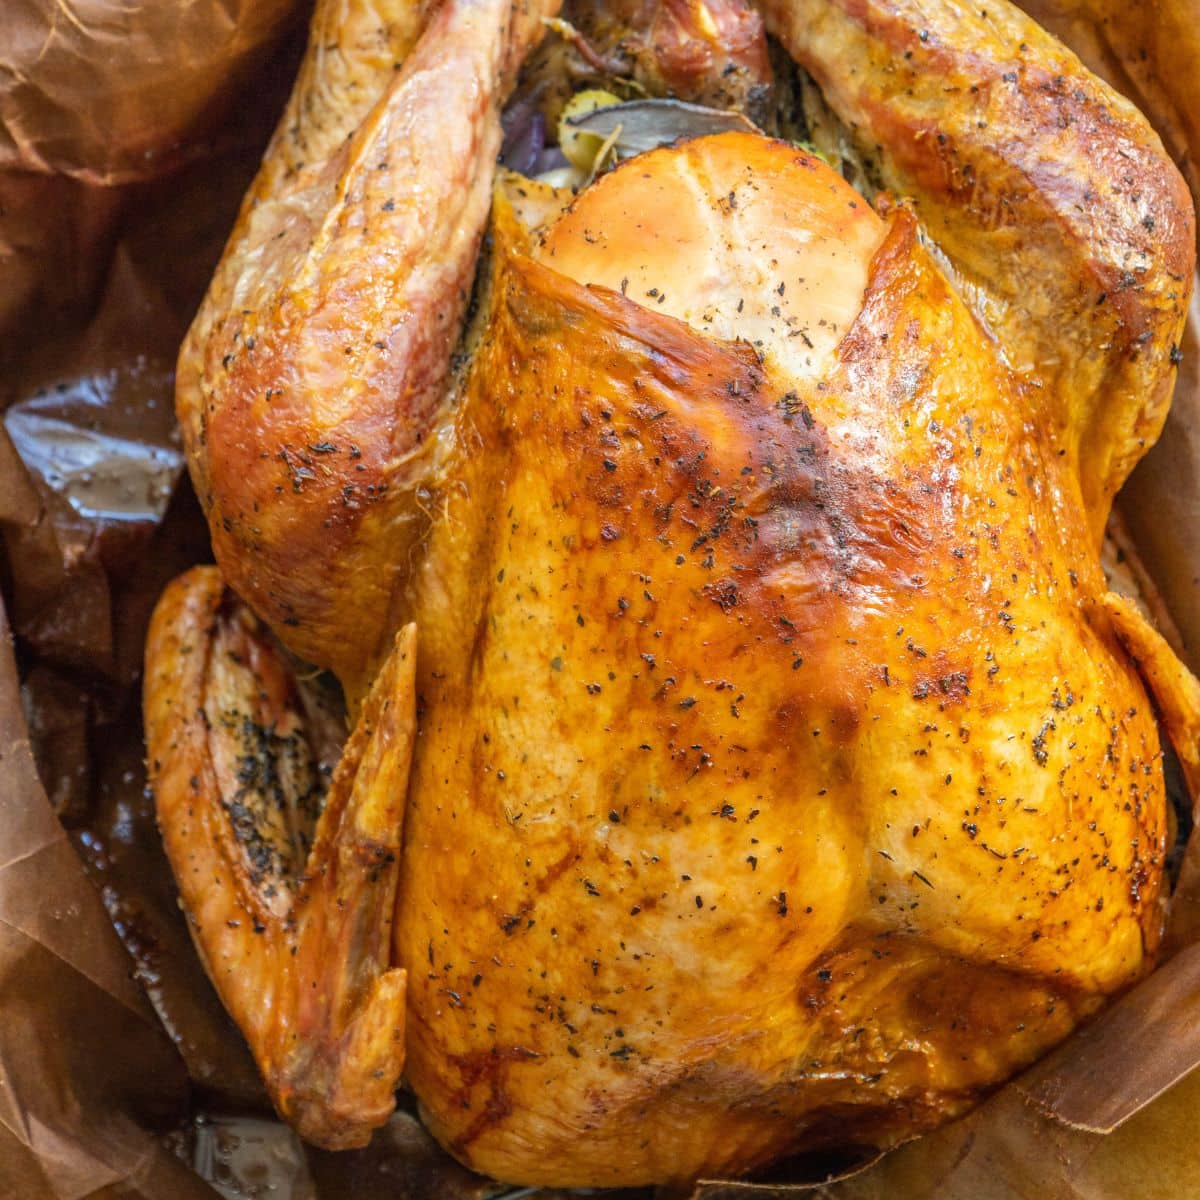 https://sweetcsdesigns.com/wp-content/uploads/2020/11/brown-bag-roasted-turkey-recipe-picture.jpg